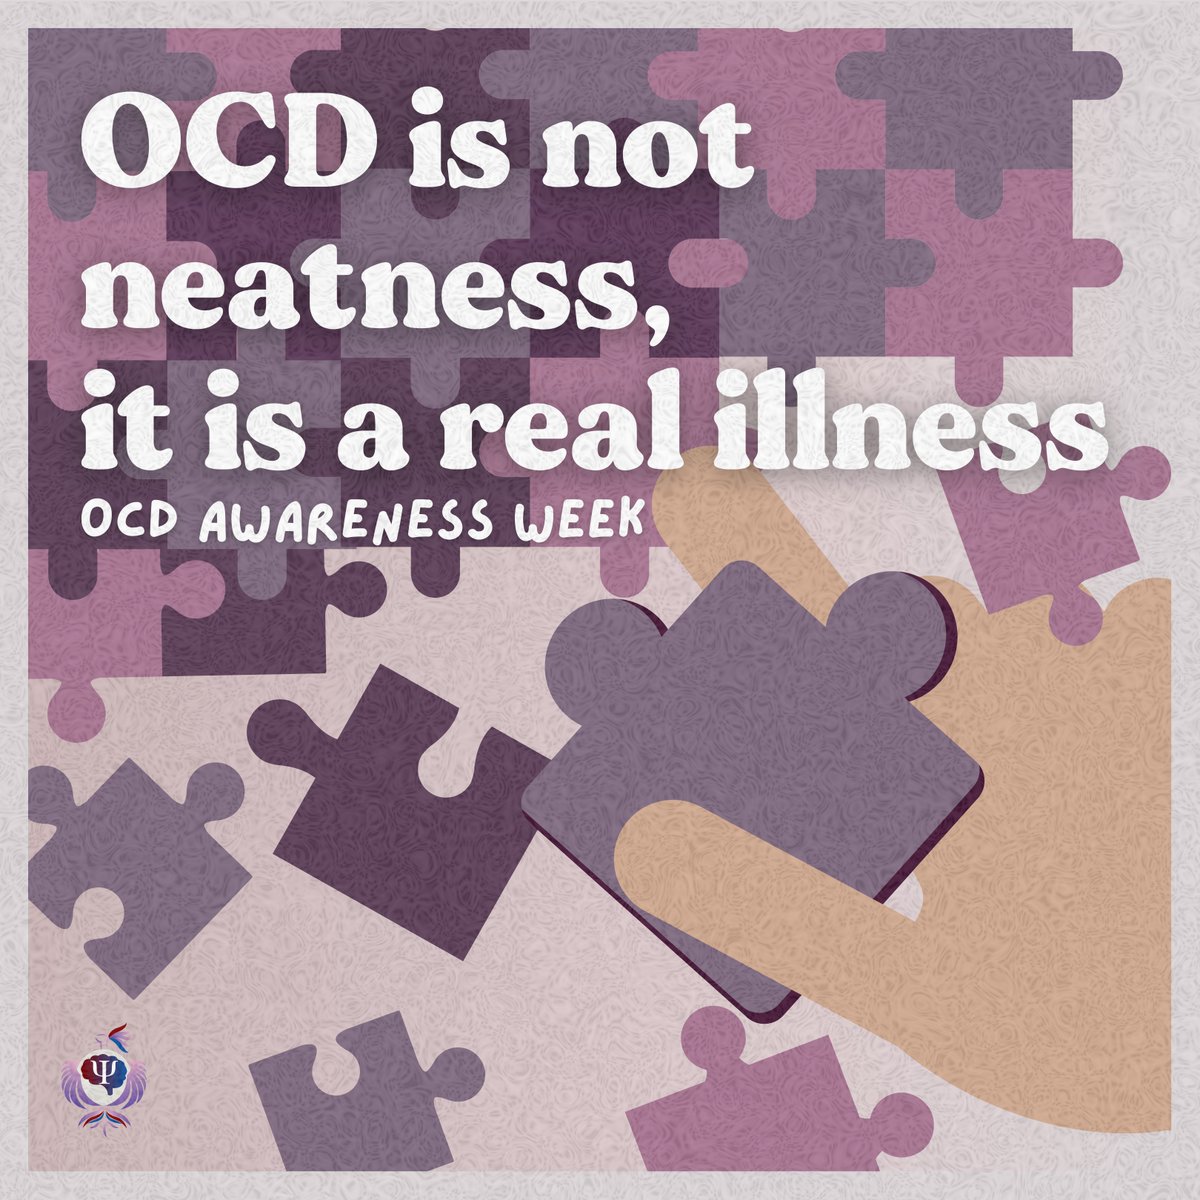 #OCDAwarenessWeek
#OnePsychCommunity

OCD Week was established in 2009 to raise awareness, share knowledge, and eliminate the stigma associated with OCD. Obsessive-Compulsive Disorder is a mental health disorder characterized by obsessive thoughts and compulsive actions.